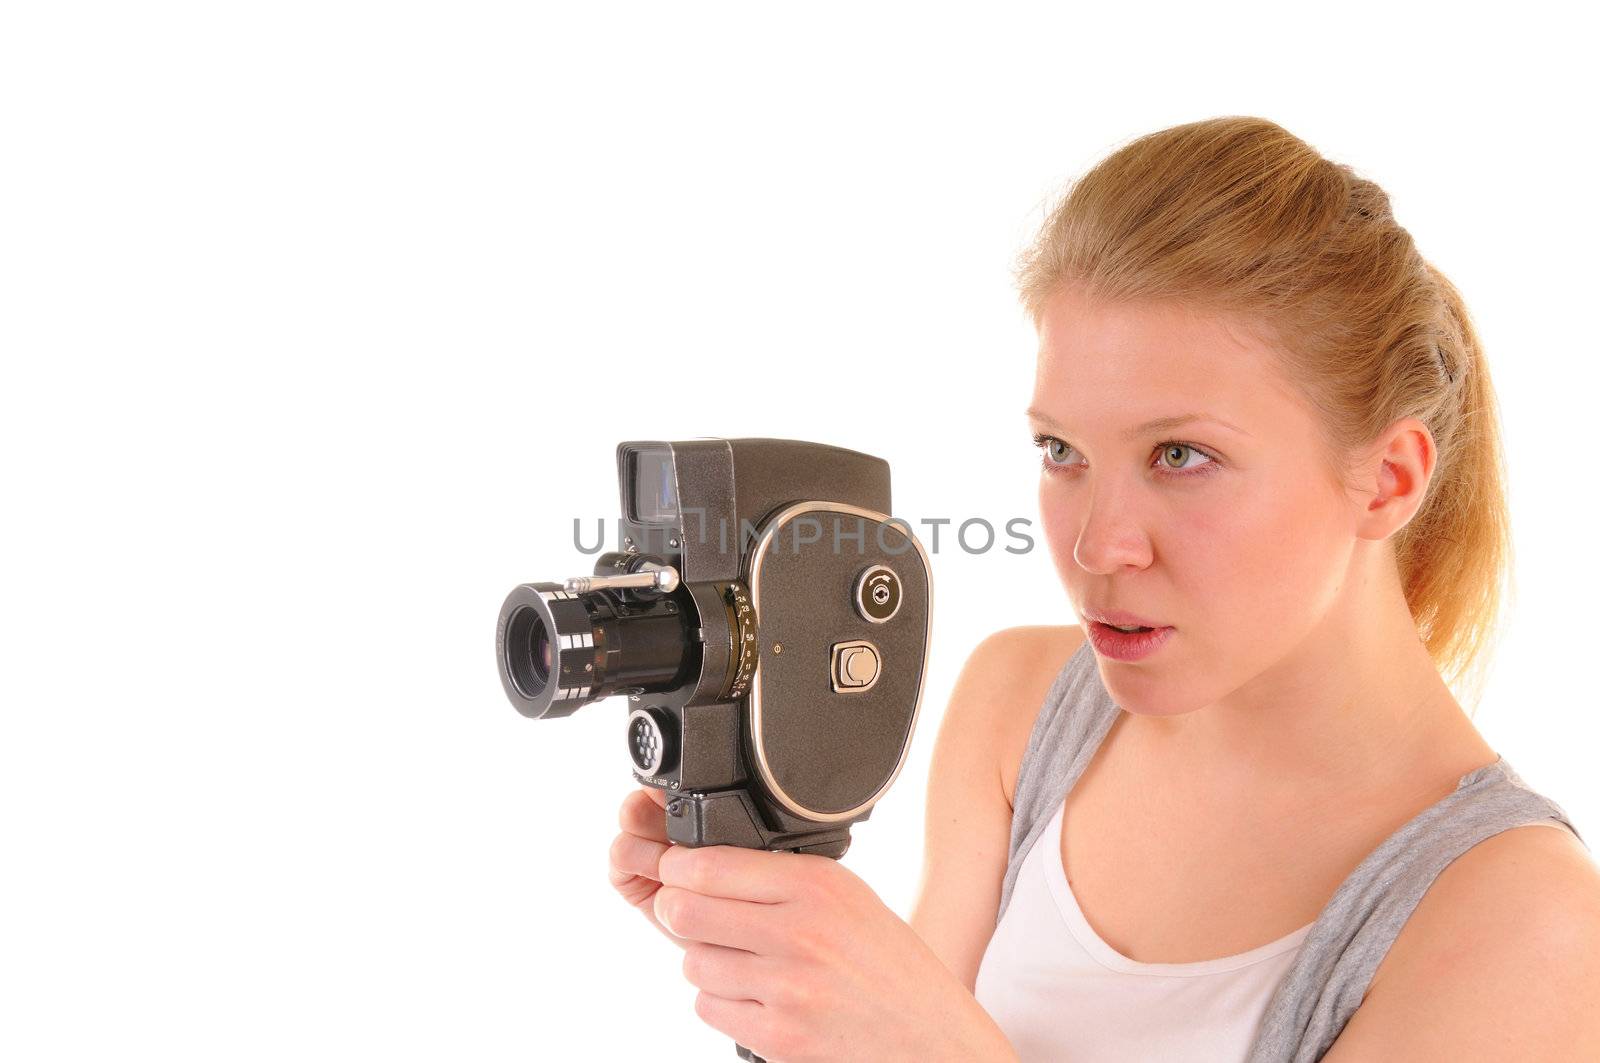 Beauty girl is shooting a film by old video camera. On white background.